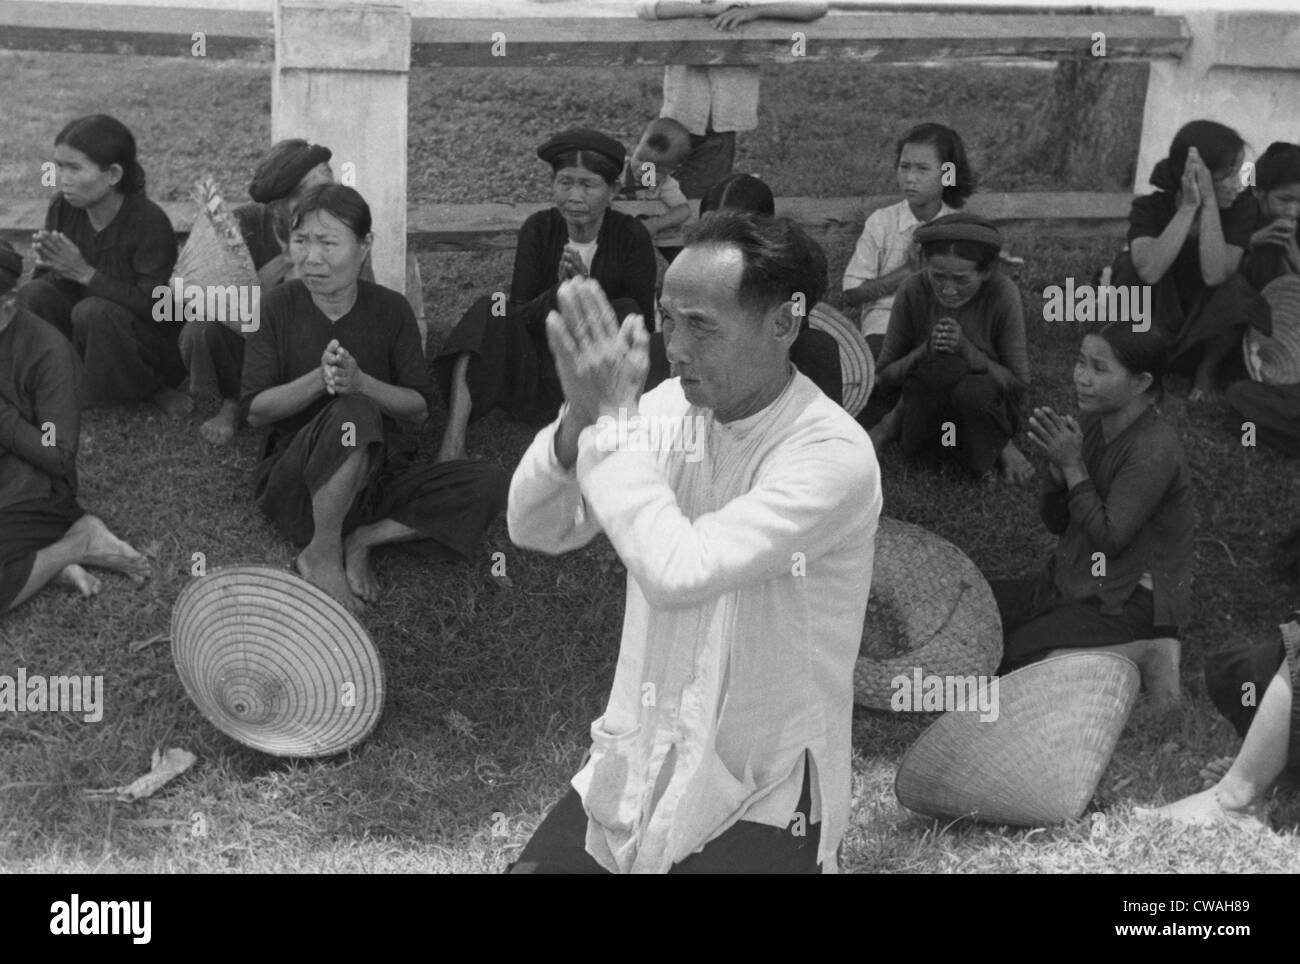 Vietnamese refugees from the First Indo-Chinese War (1946-1954) in Thailand in 1955.  Photo title is 'Prayer for Refuge' Stock Photo